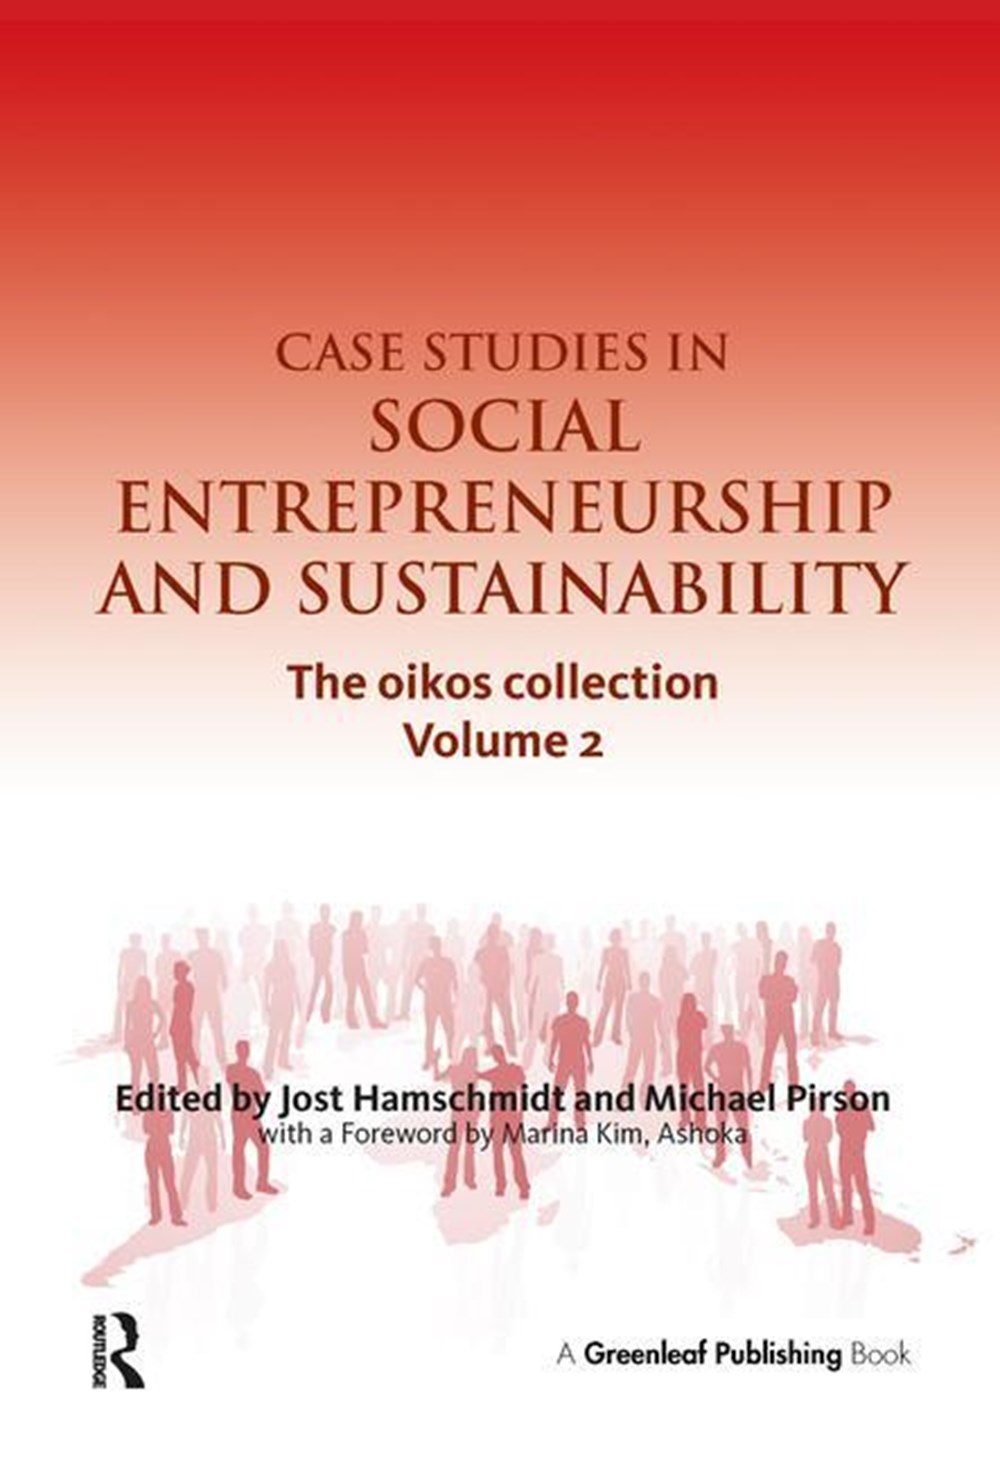 Case Studies in Social Entrepreneurship and Sustainability: The Oikos Collection Vol. 2